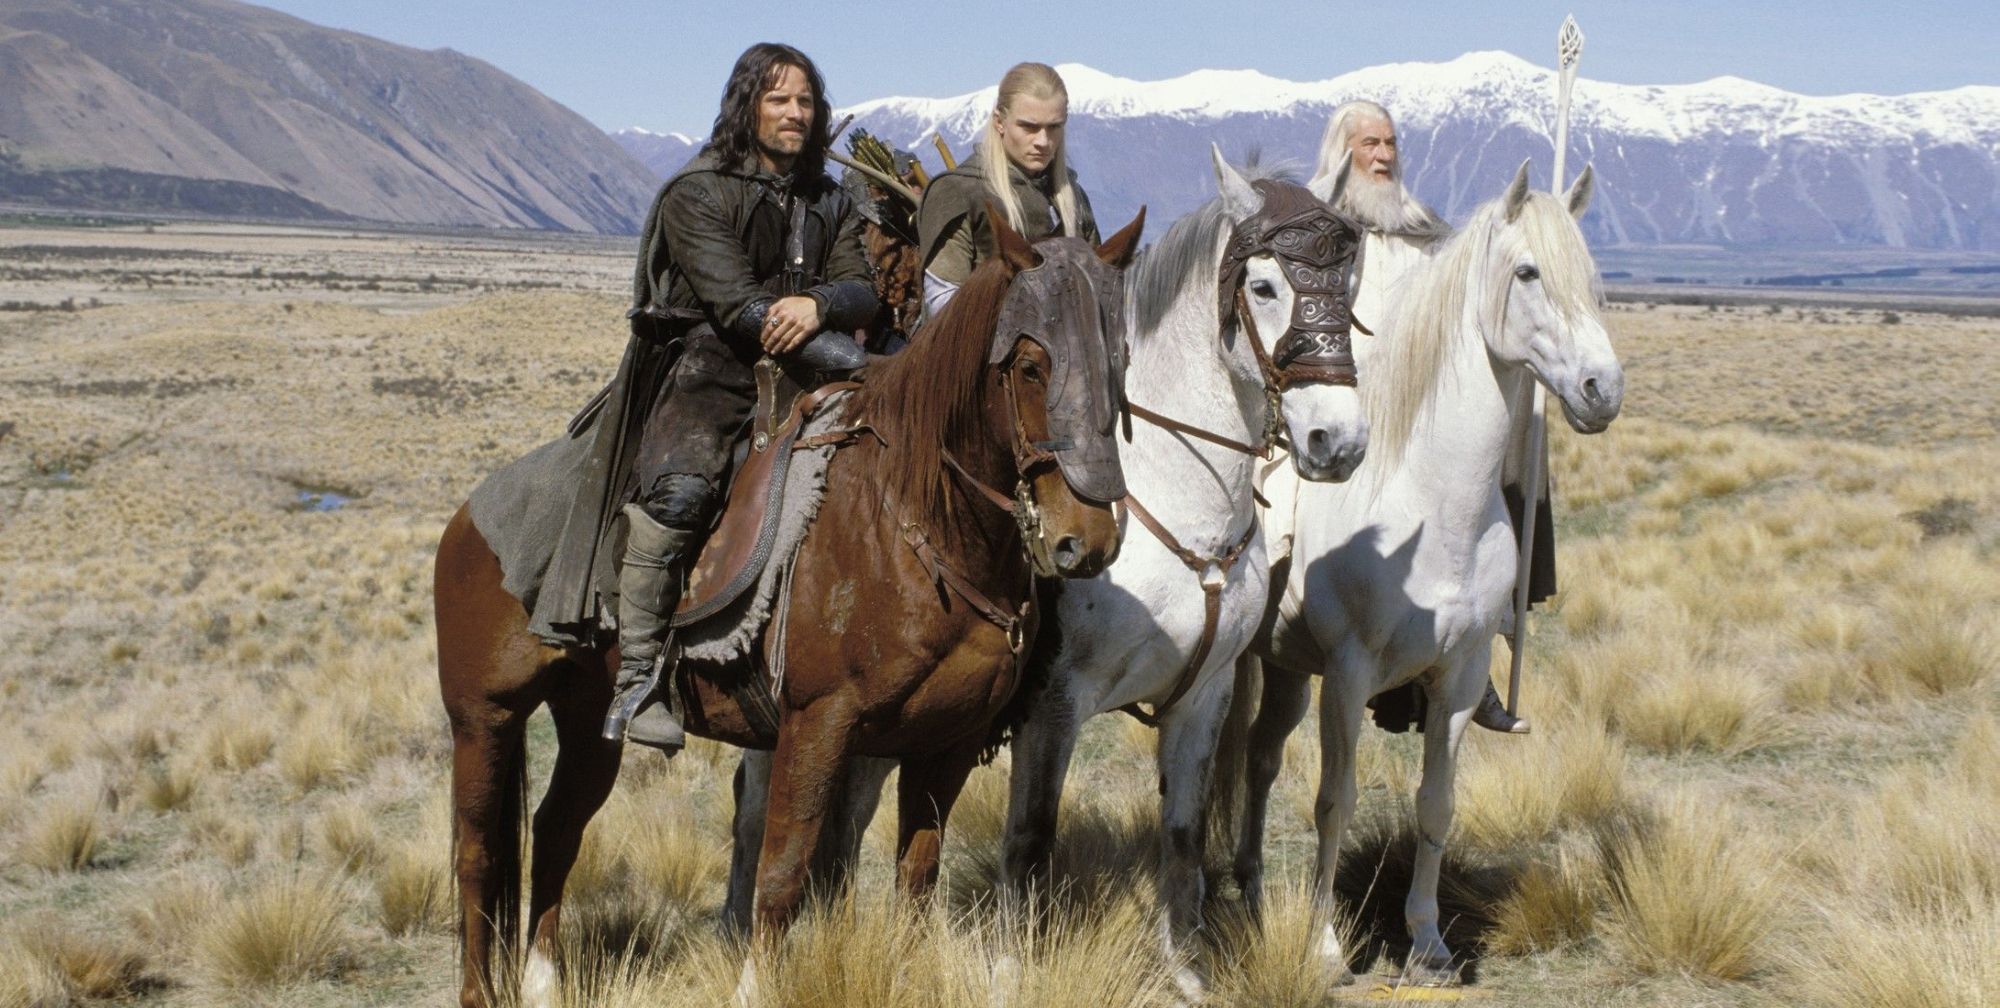 The Lord of the Rings - The Two Towers - 2002